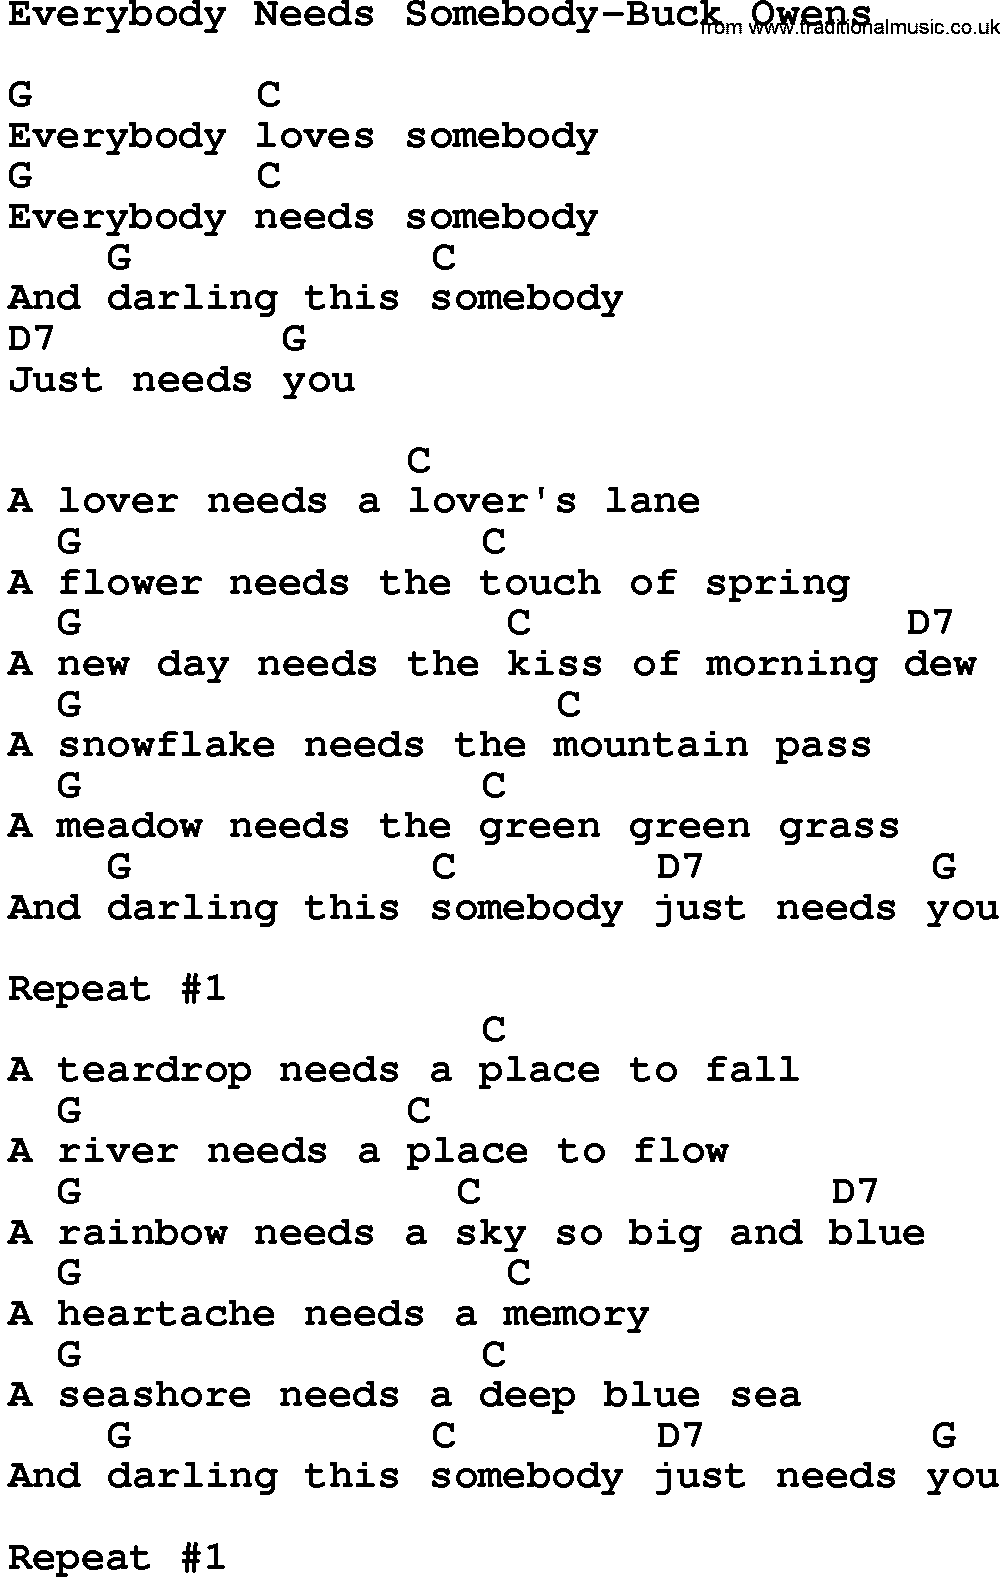 Country music song: Everybody Needs Somebody-Buck Owens lyrics and chords